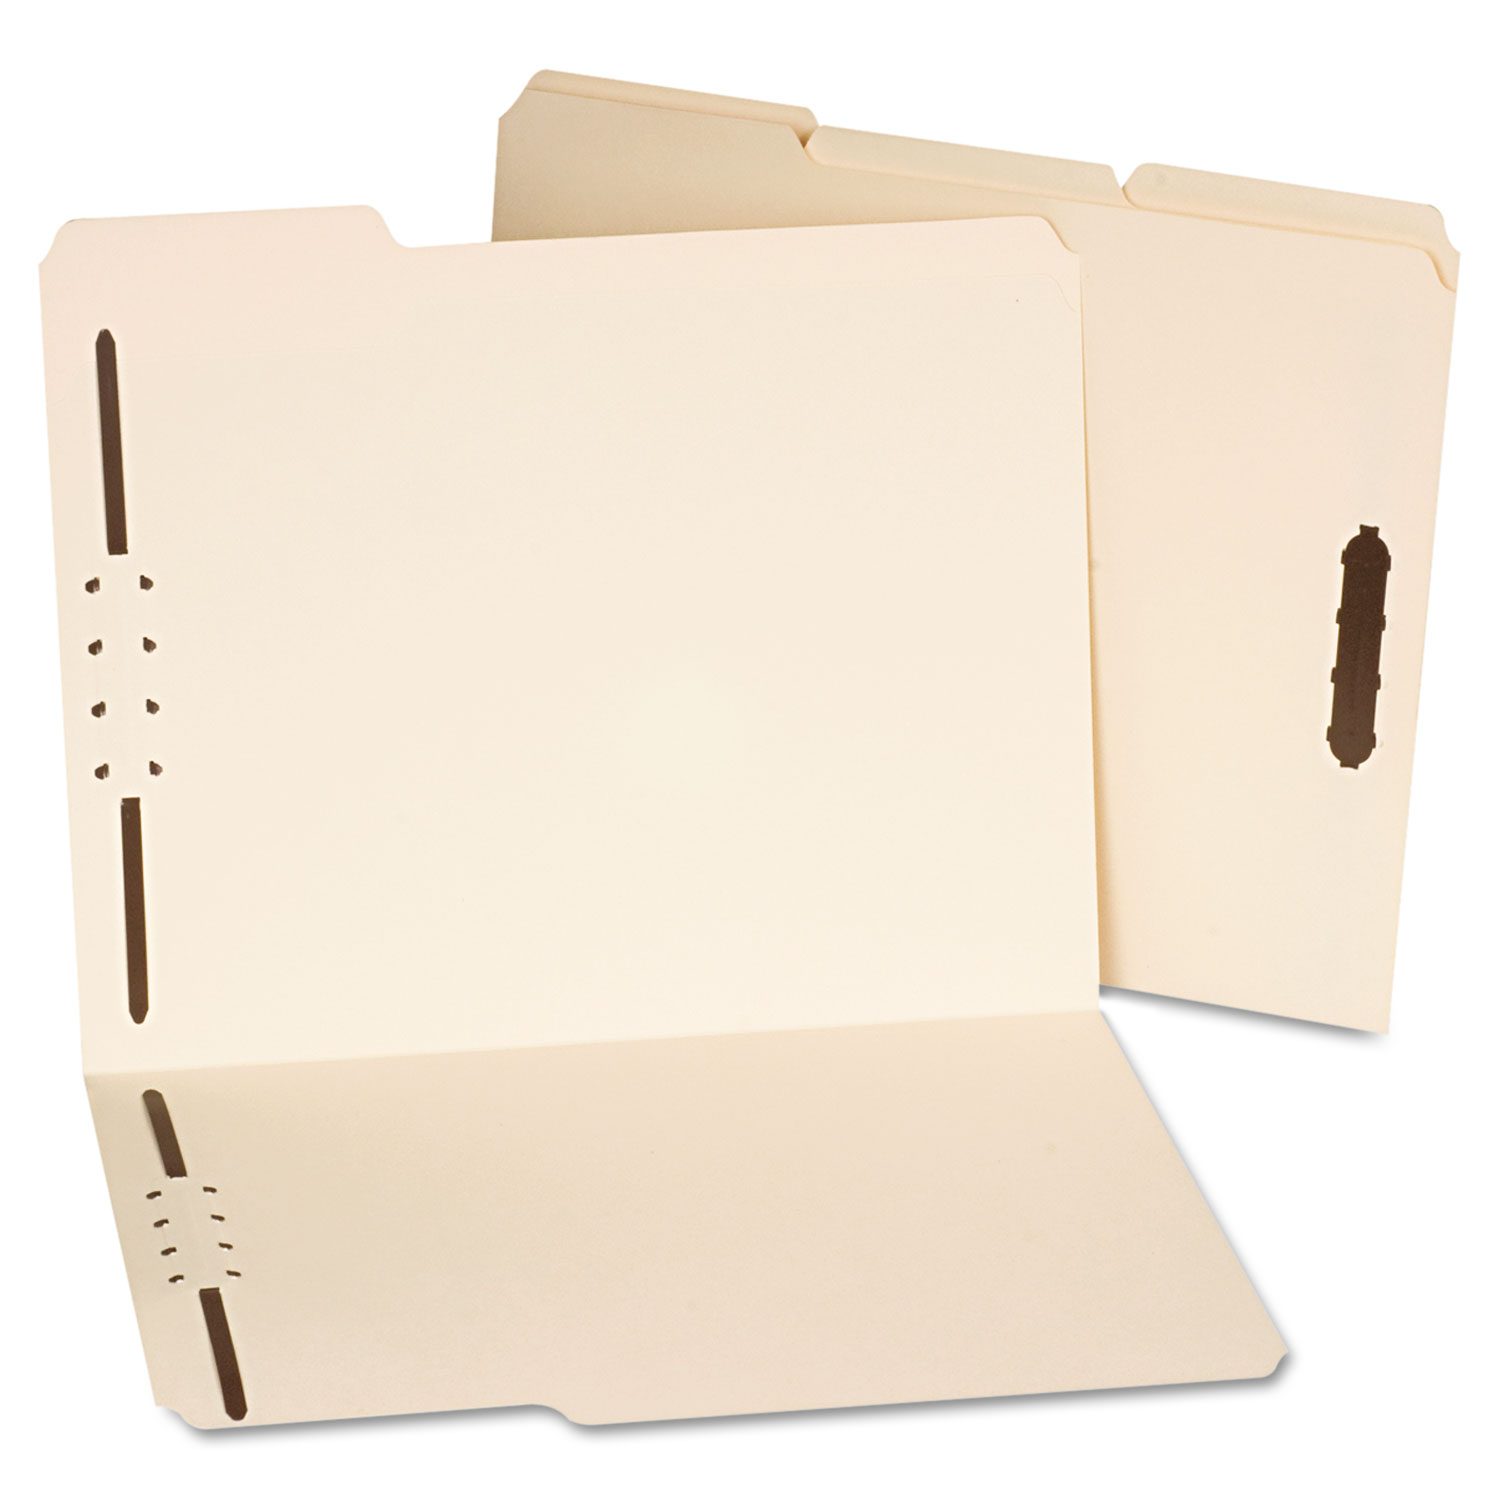  Universal UNV13420 Deluxe Reinforced Top Tab Folders with Two Fasteners, 1/3-Cut Tabs, Letter Size, Manila, 50/Box (UNV13420) 